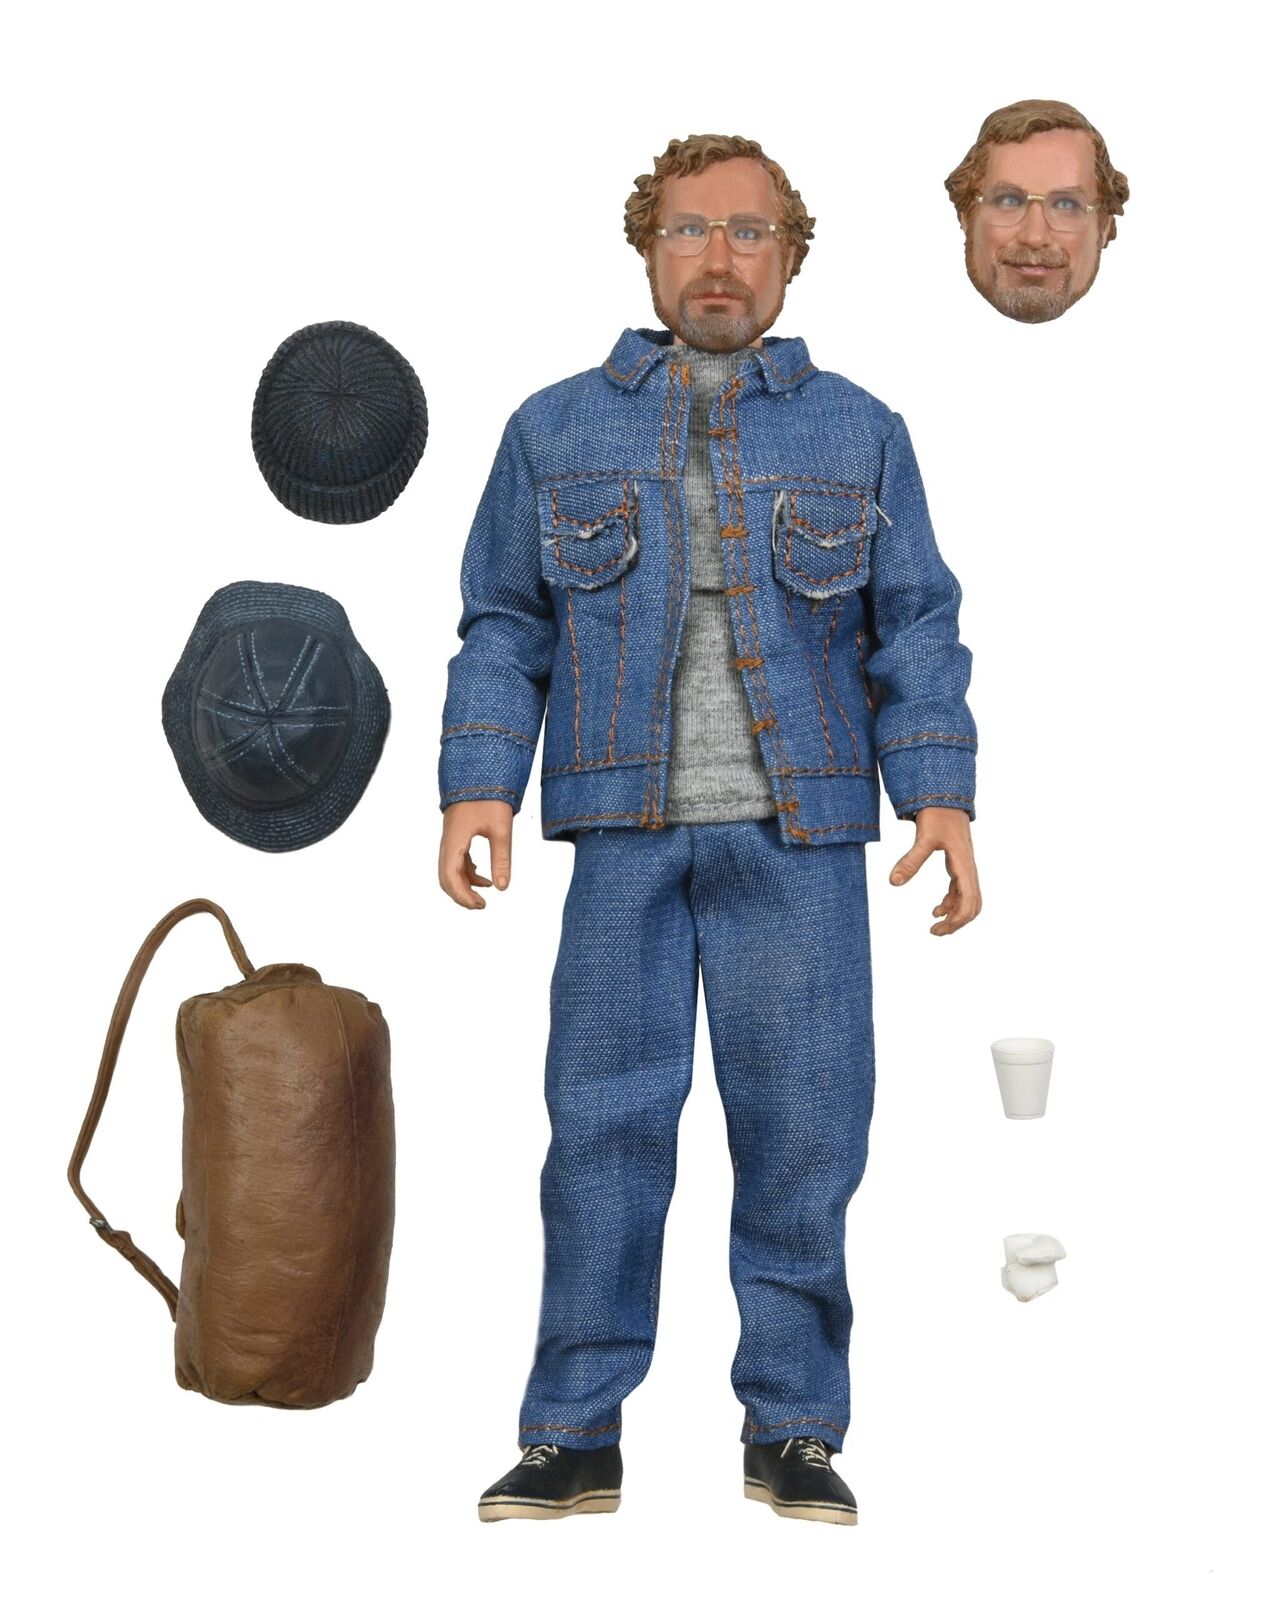 Matt Hooper - 8" Scale Clothed Action Figure - Jaws - NECA Collectibles